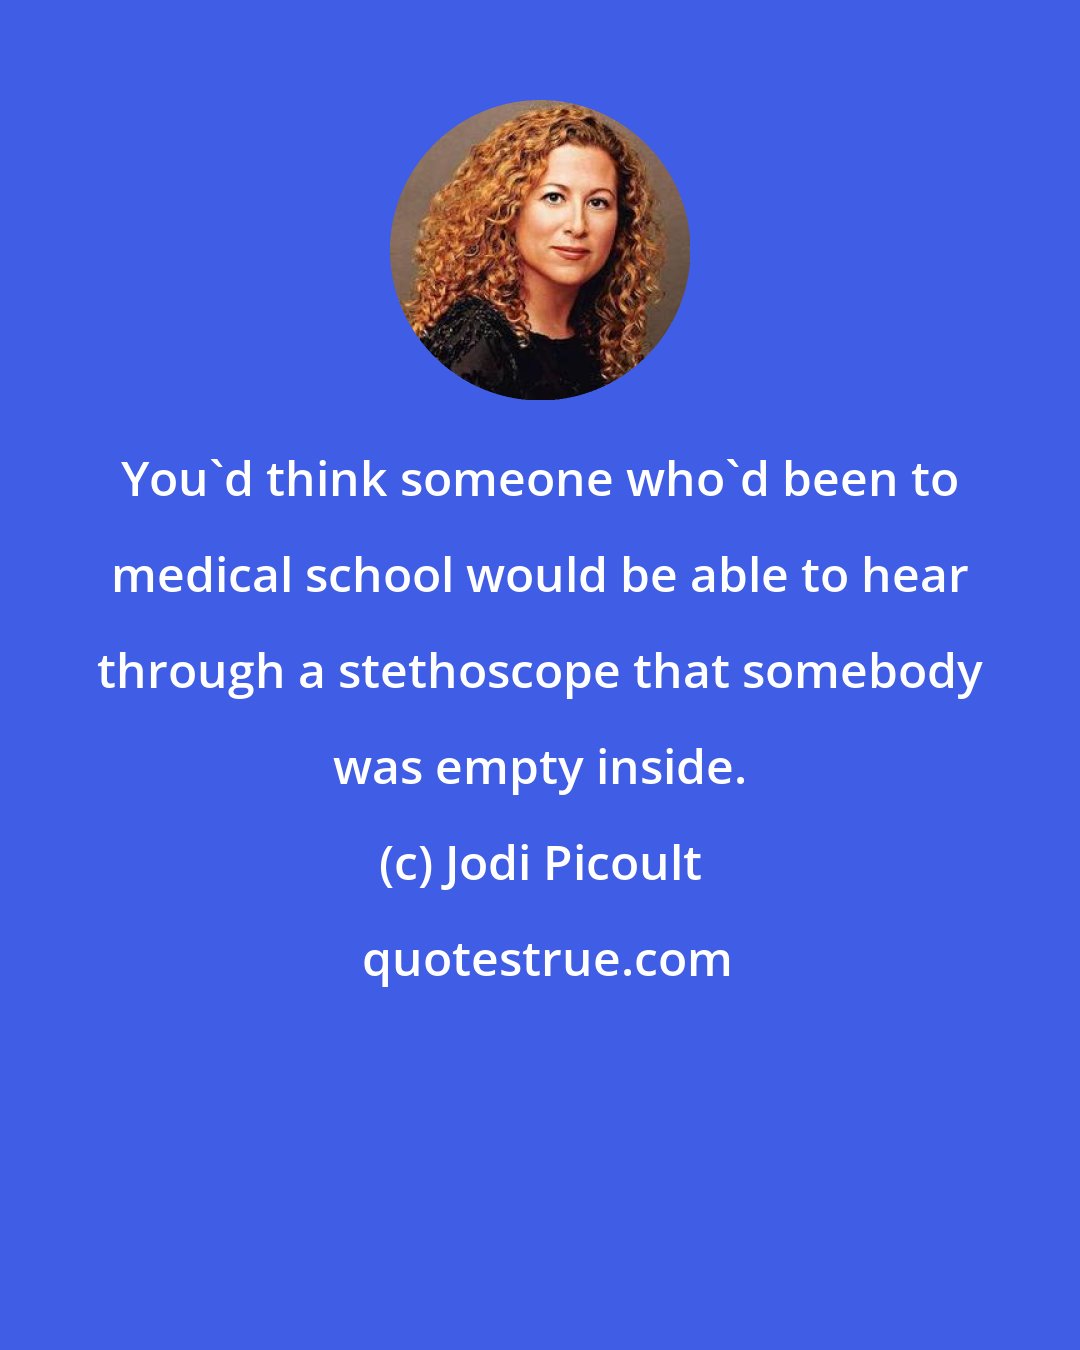 Jodi Picoult: You'd think someone who'd been to medical school would be able to hear through a stethoscope that somebody was empty inside.